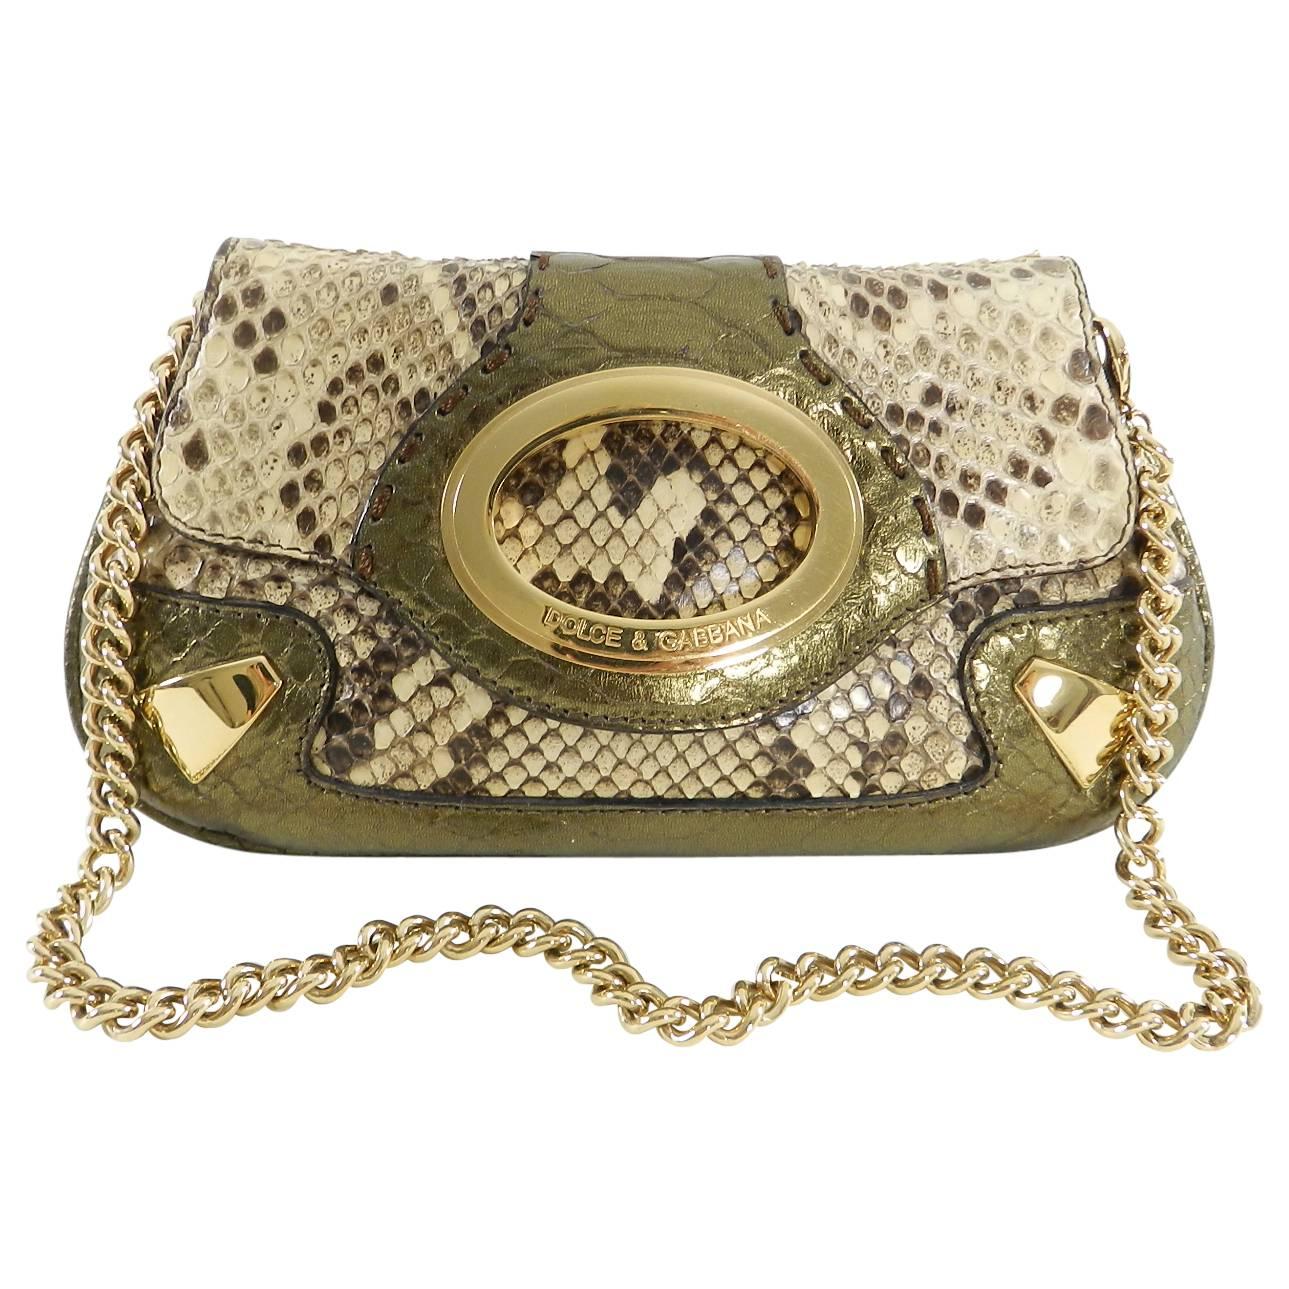 Dolce & Gabbana Bronze Python Mini Bag and Coin Pouch Set.  Natural python skin trimmed with bronze metallic grained leather and goldtone metal hardware.  Magnetic closure, brown jacquard logo fabric lined interior, suede interior flap.  Excellent